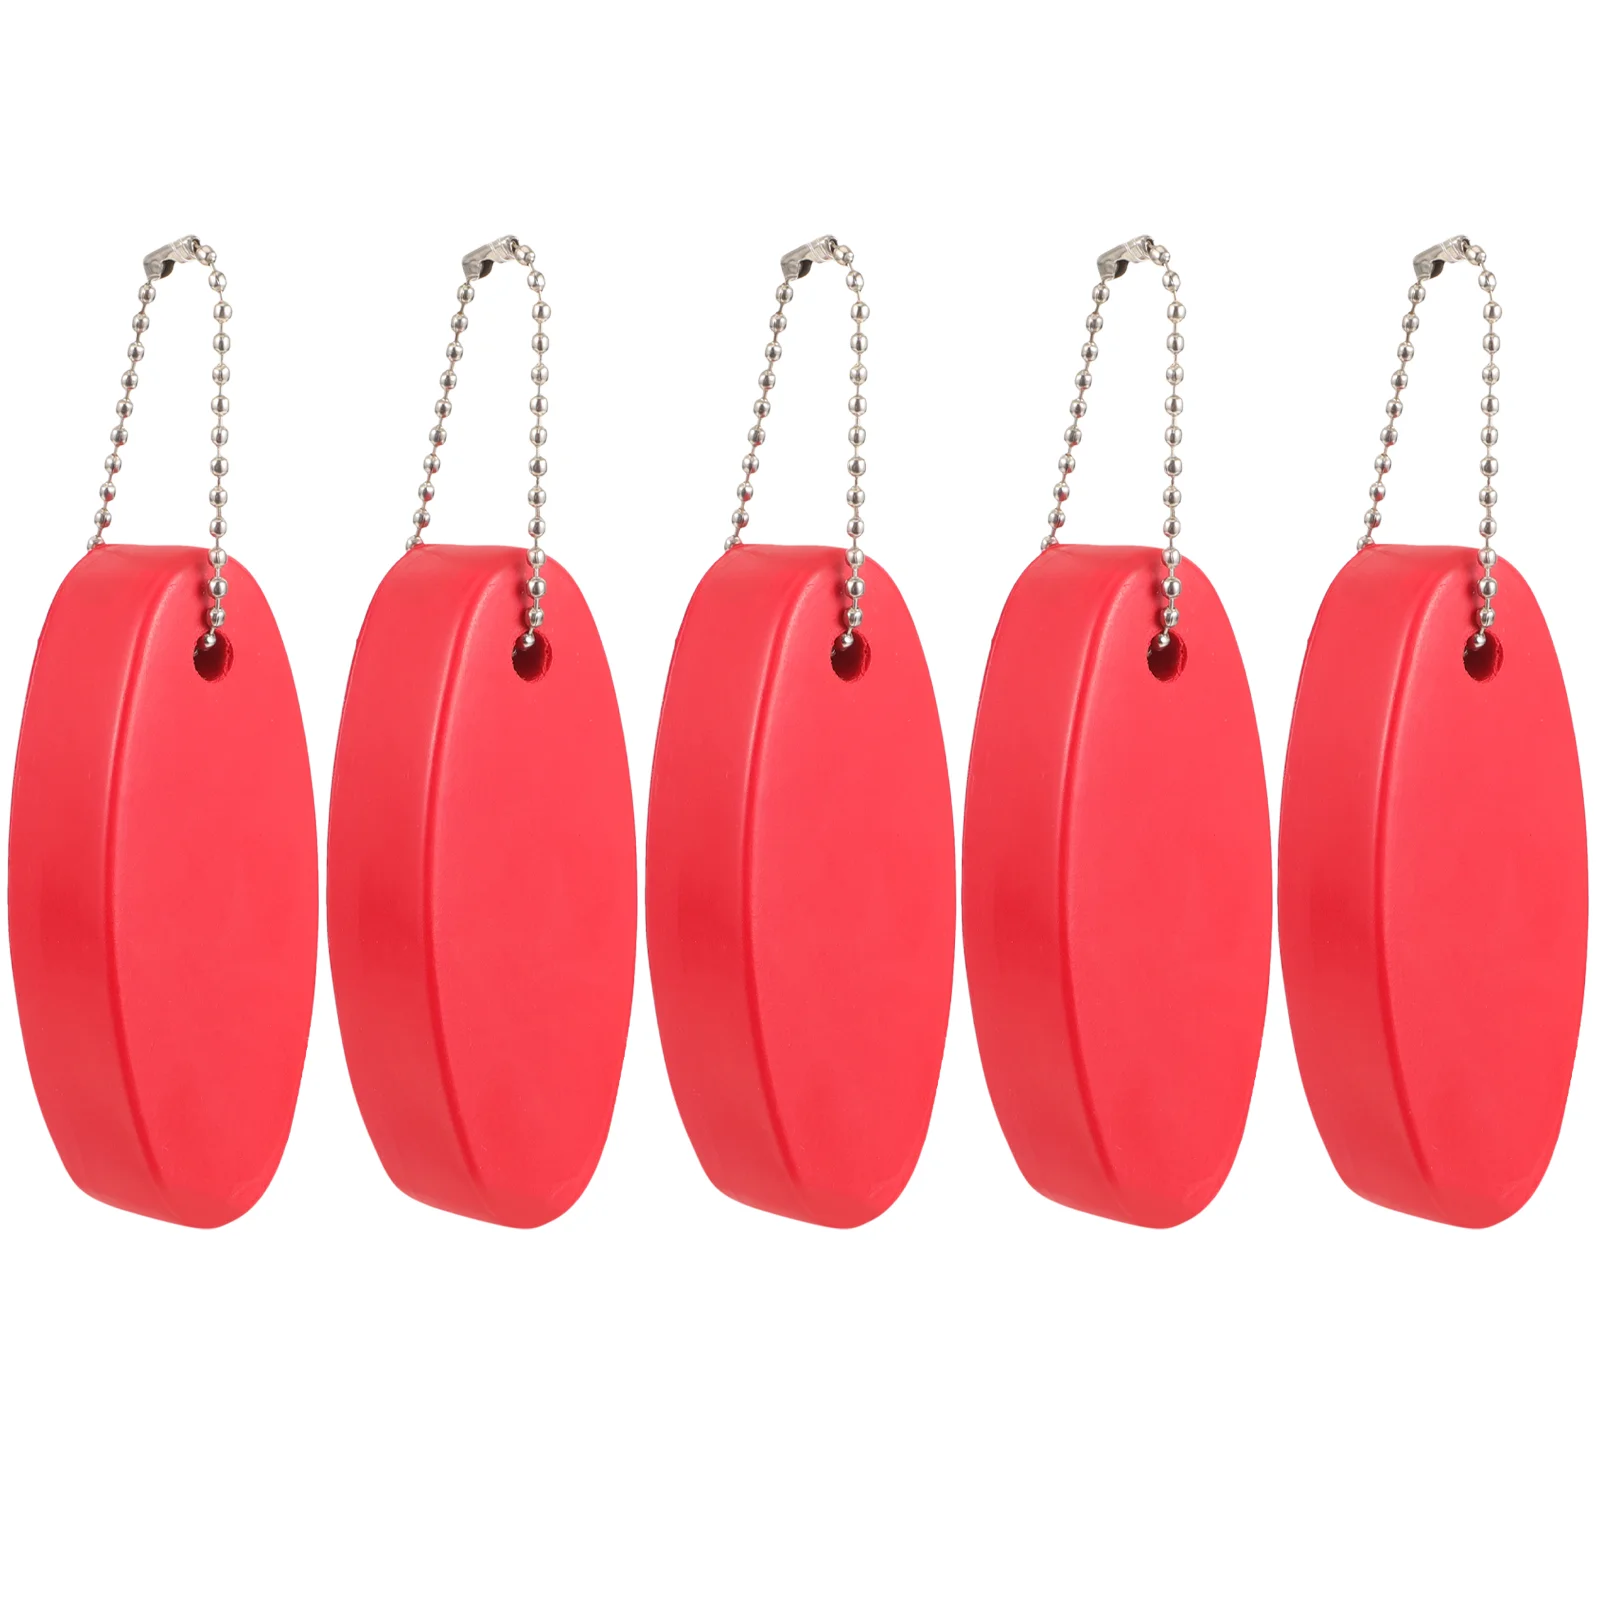 5Pcs Floating Keychains Colored Floating Key Rings Water Sports Keychains Surfboard Pendant Keychains 8pcs billiards keychains keyrings colored billiards ball pendants sports themed keychains